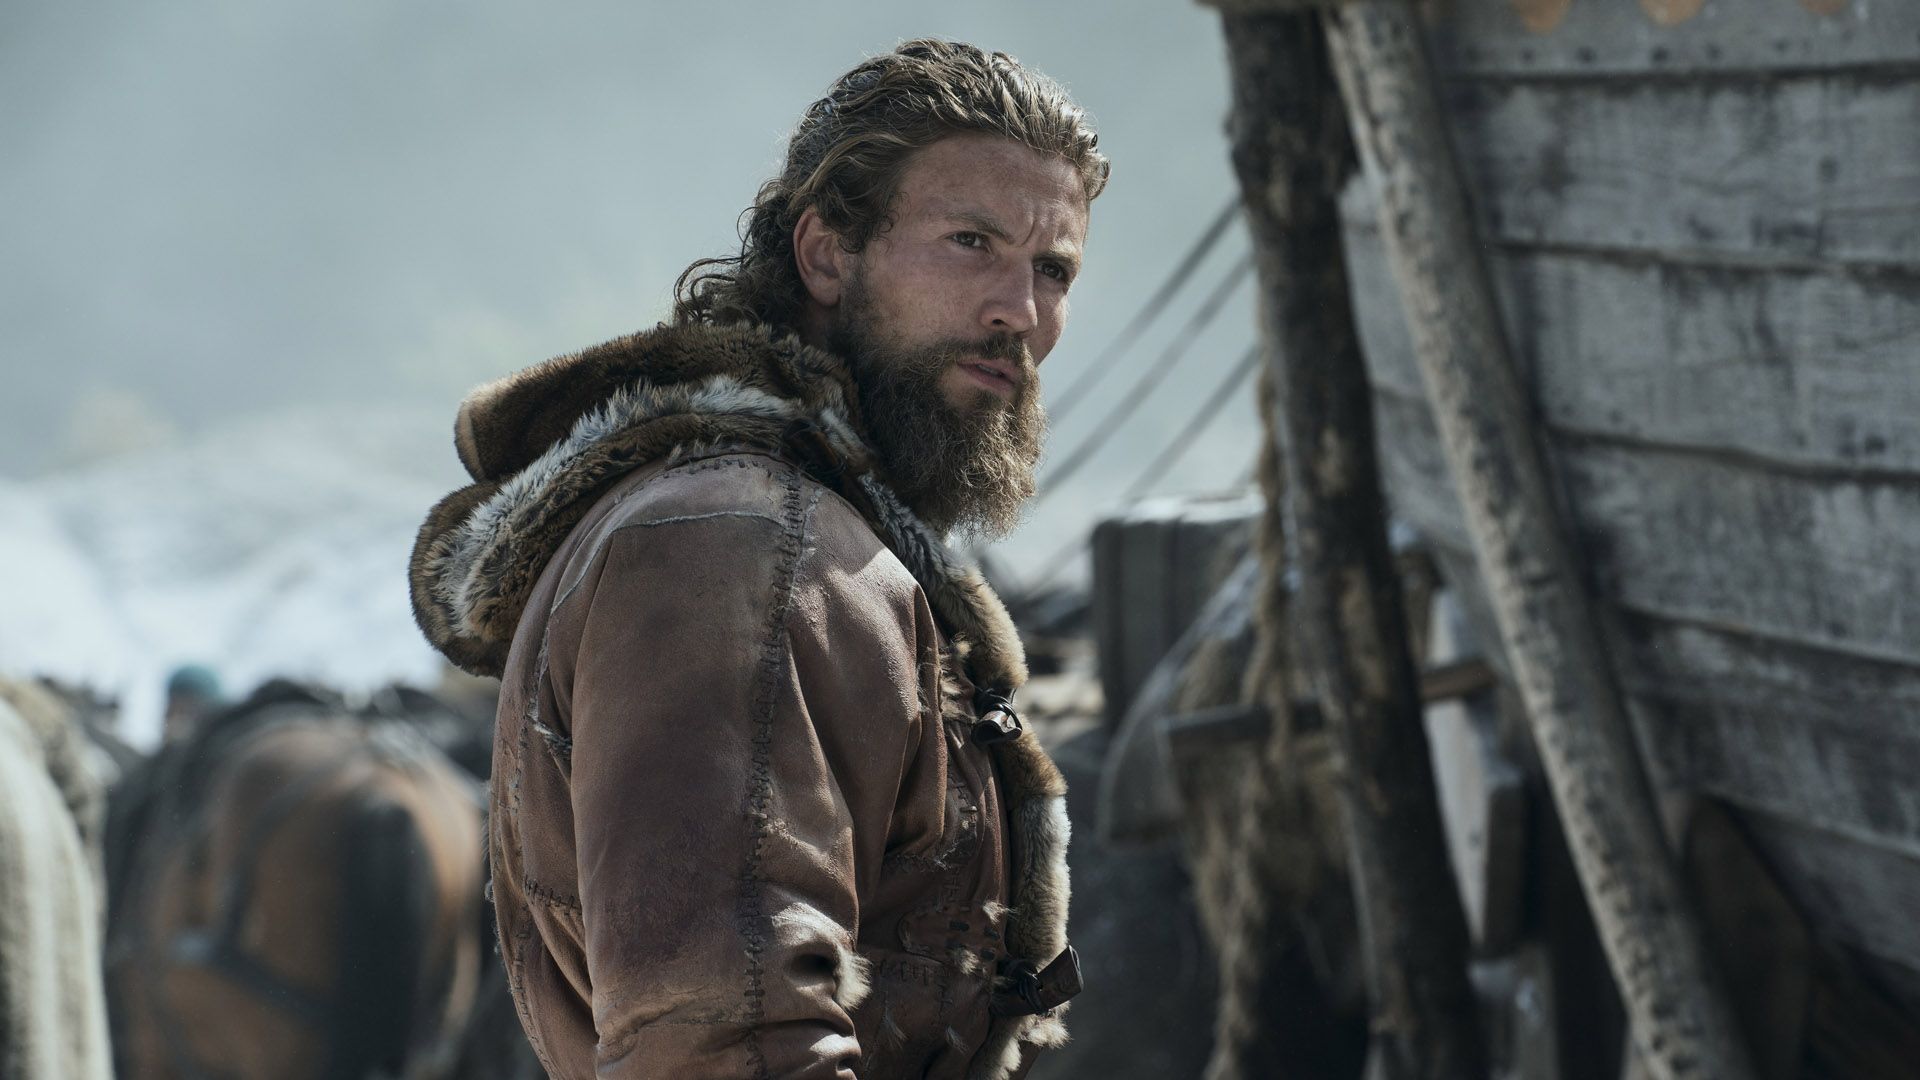 Vikings Valhalla creator provides exciting update on the hit Netflix